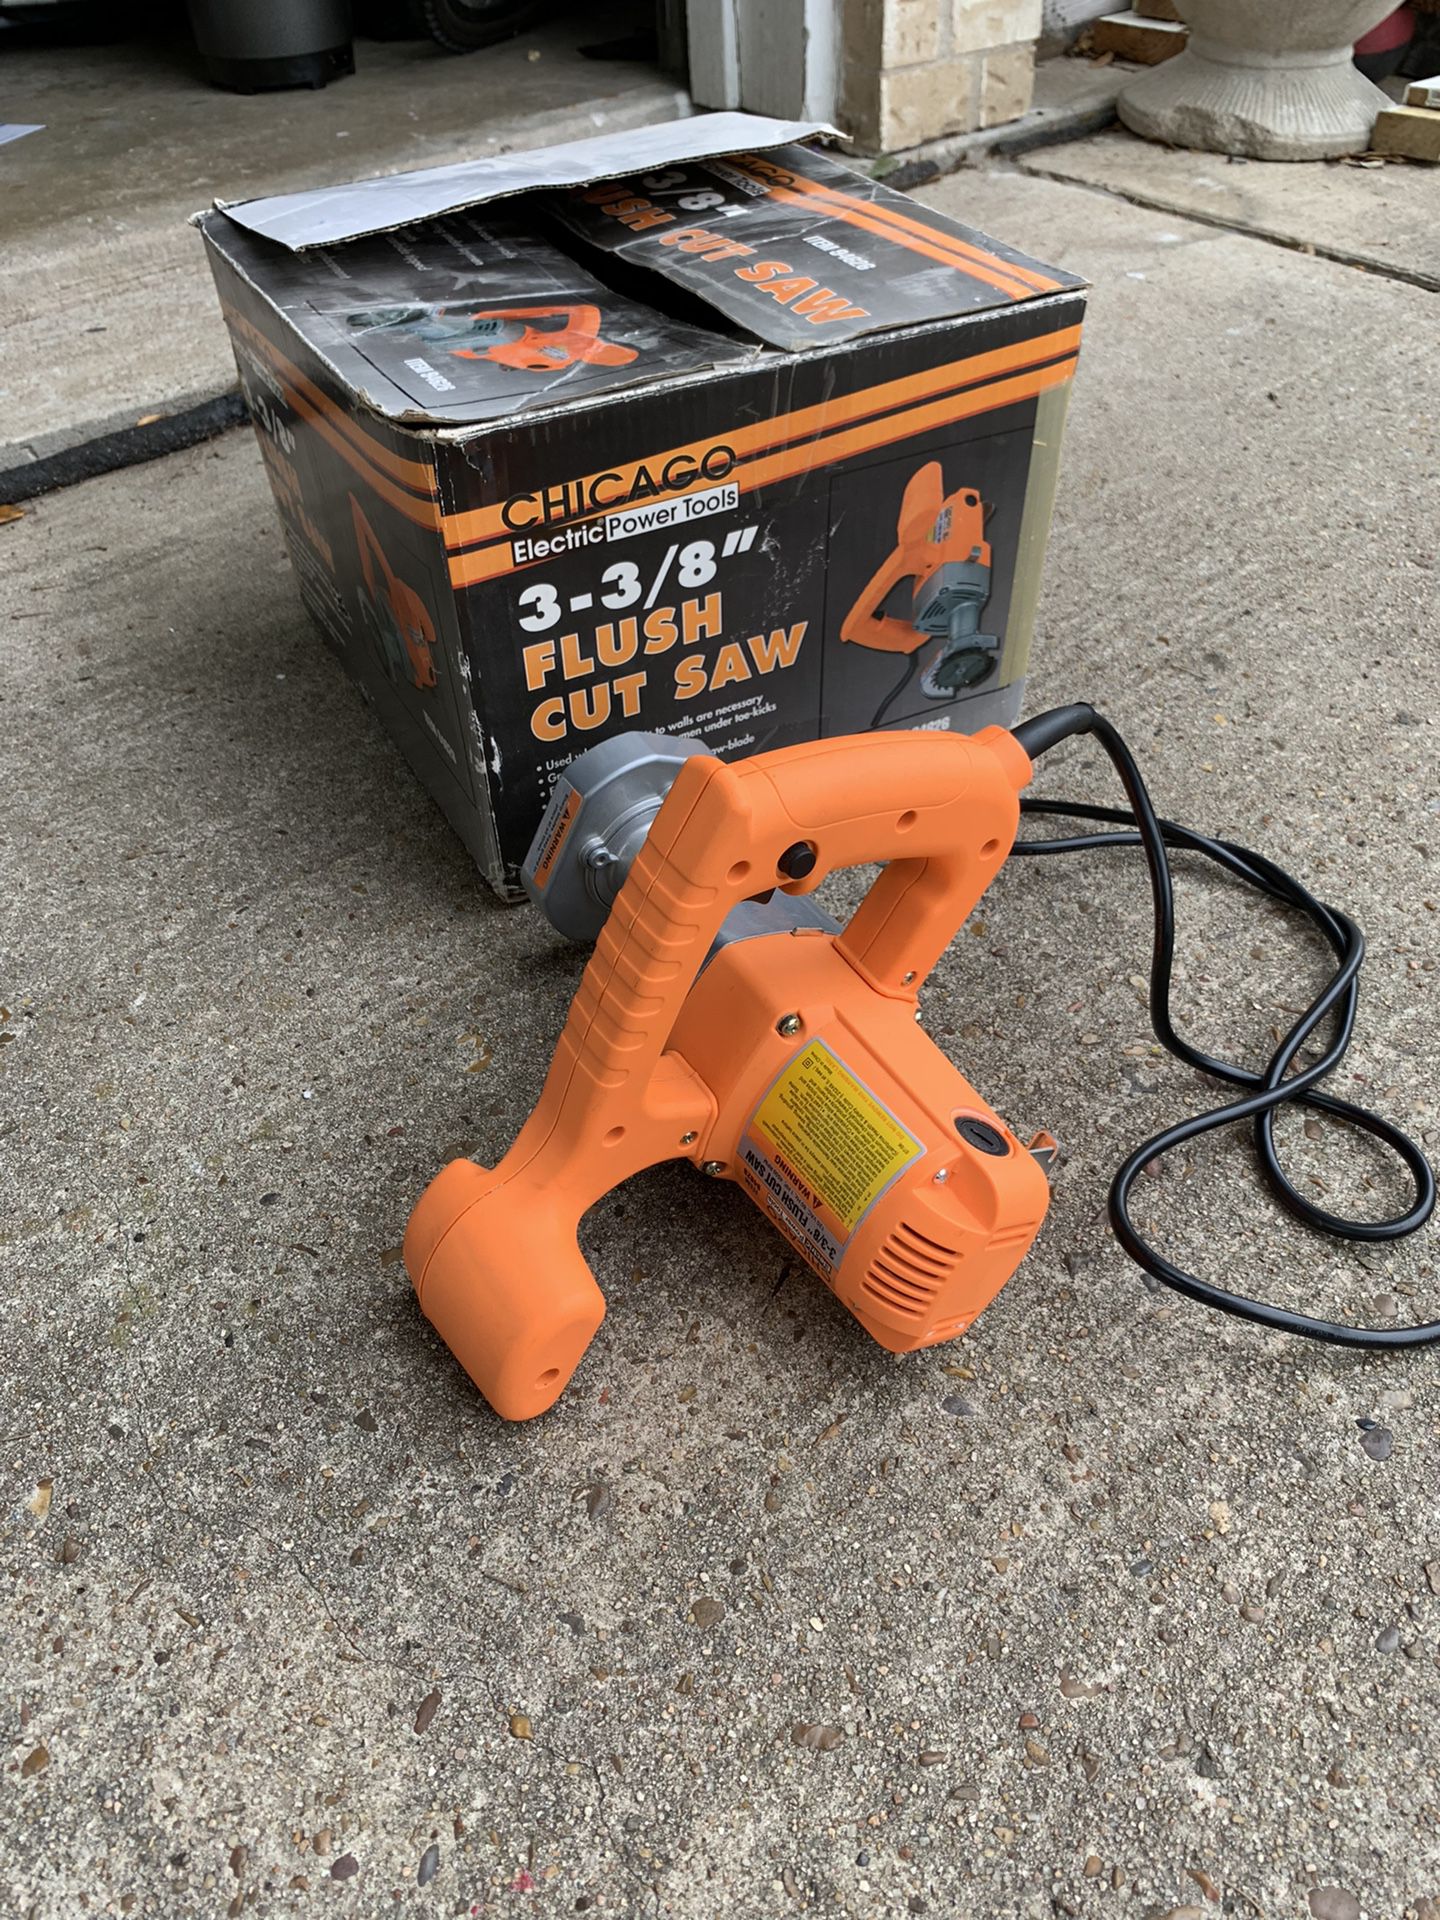 Flush Cut Saw 3-3/8” for Sale in Pasadena, TX OfferUp